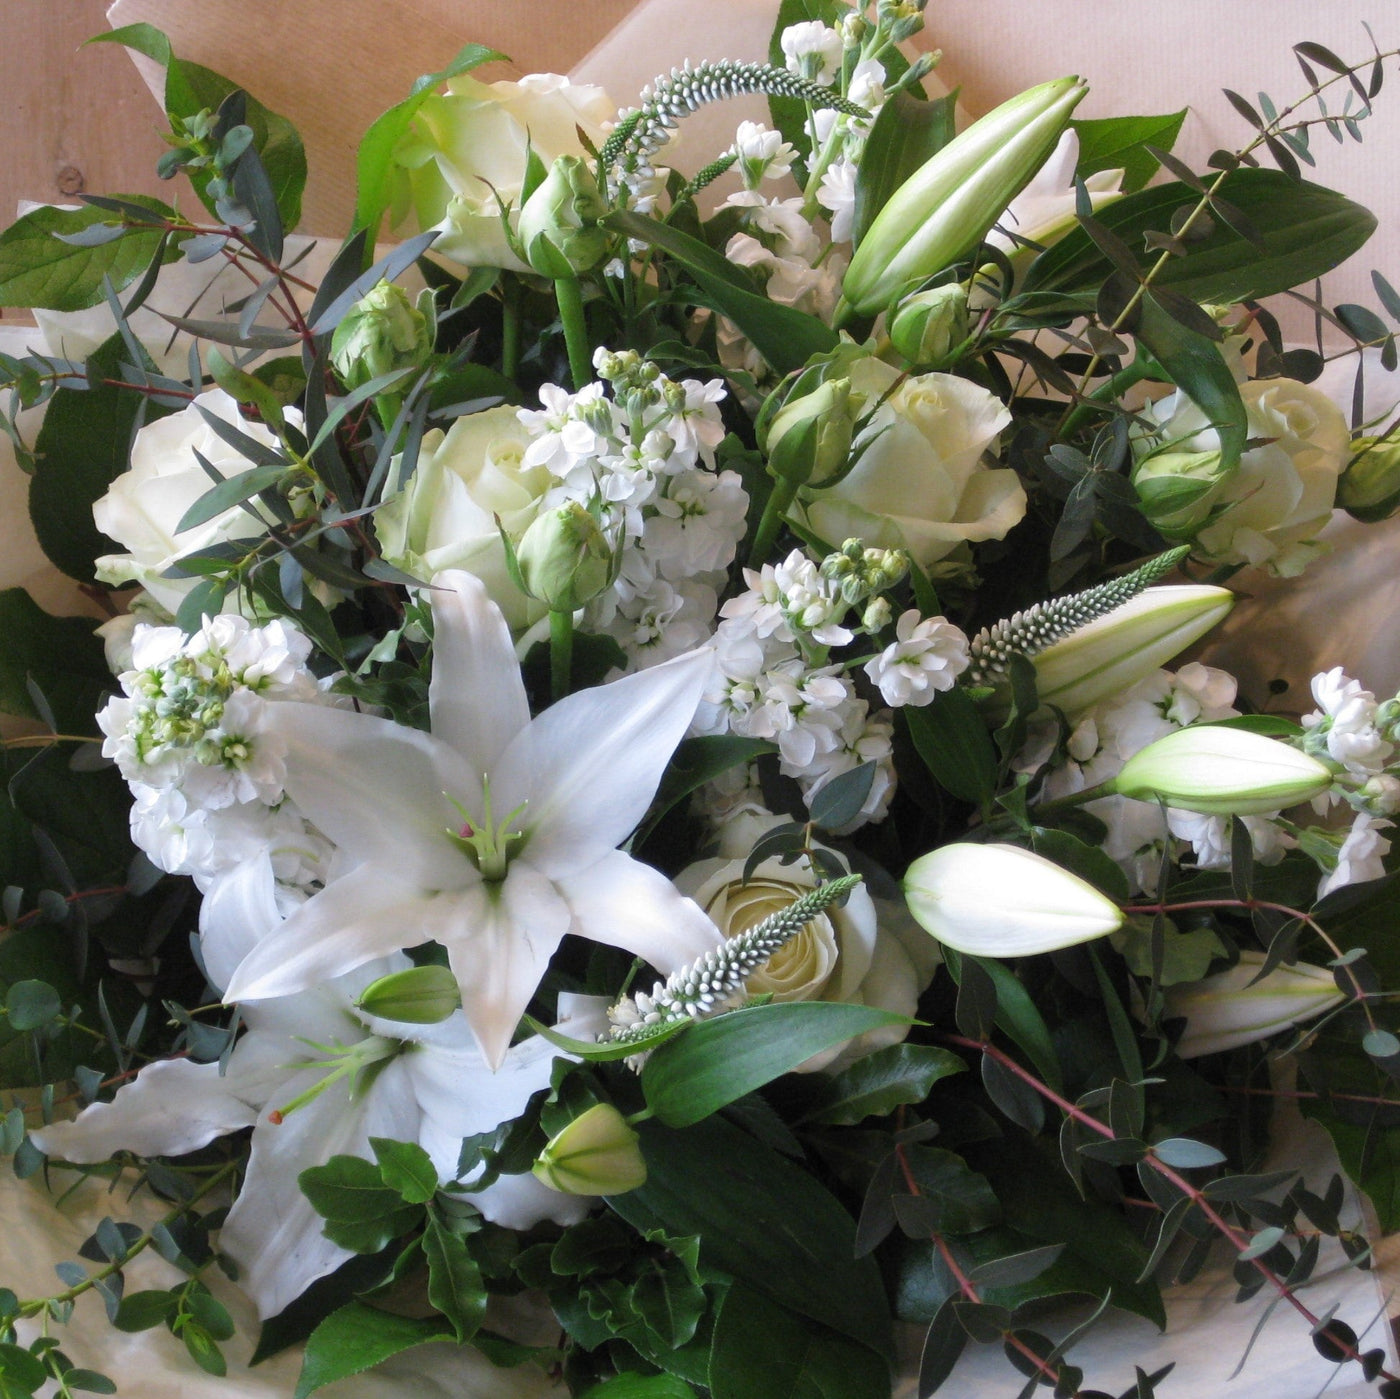 Lily and rose bouquet all white.